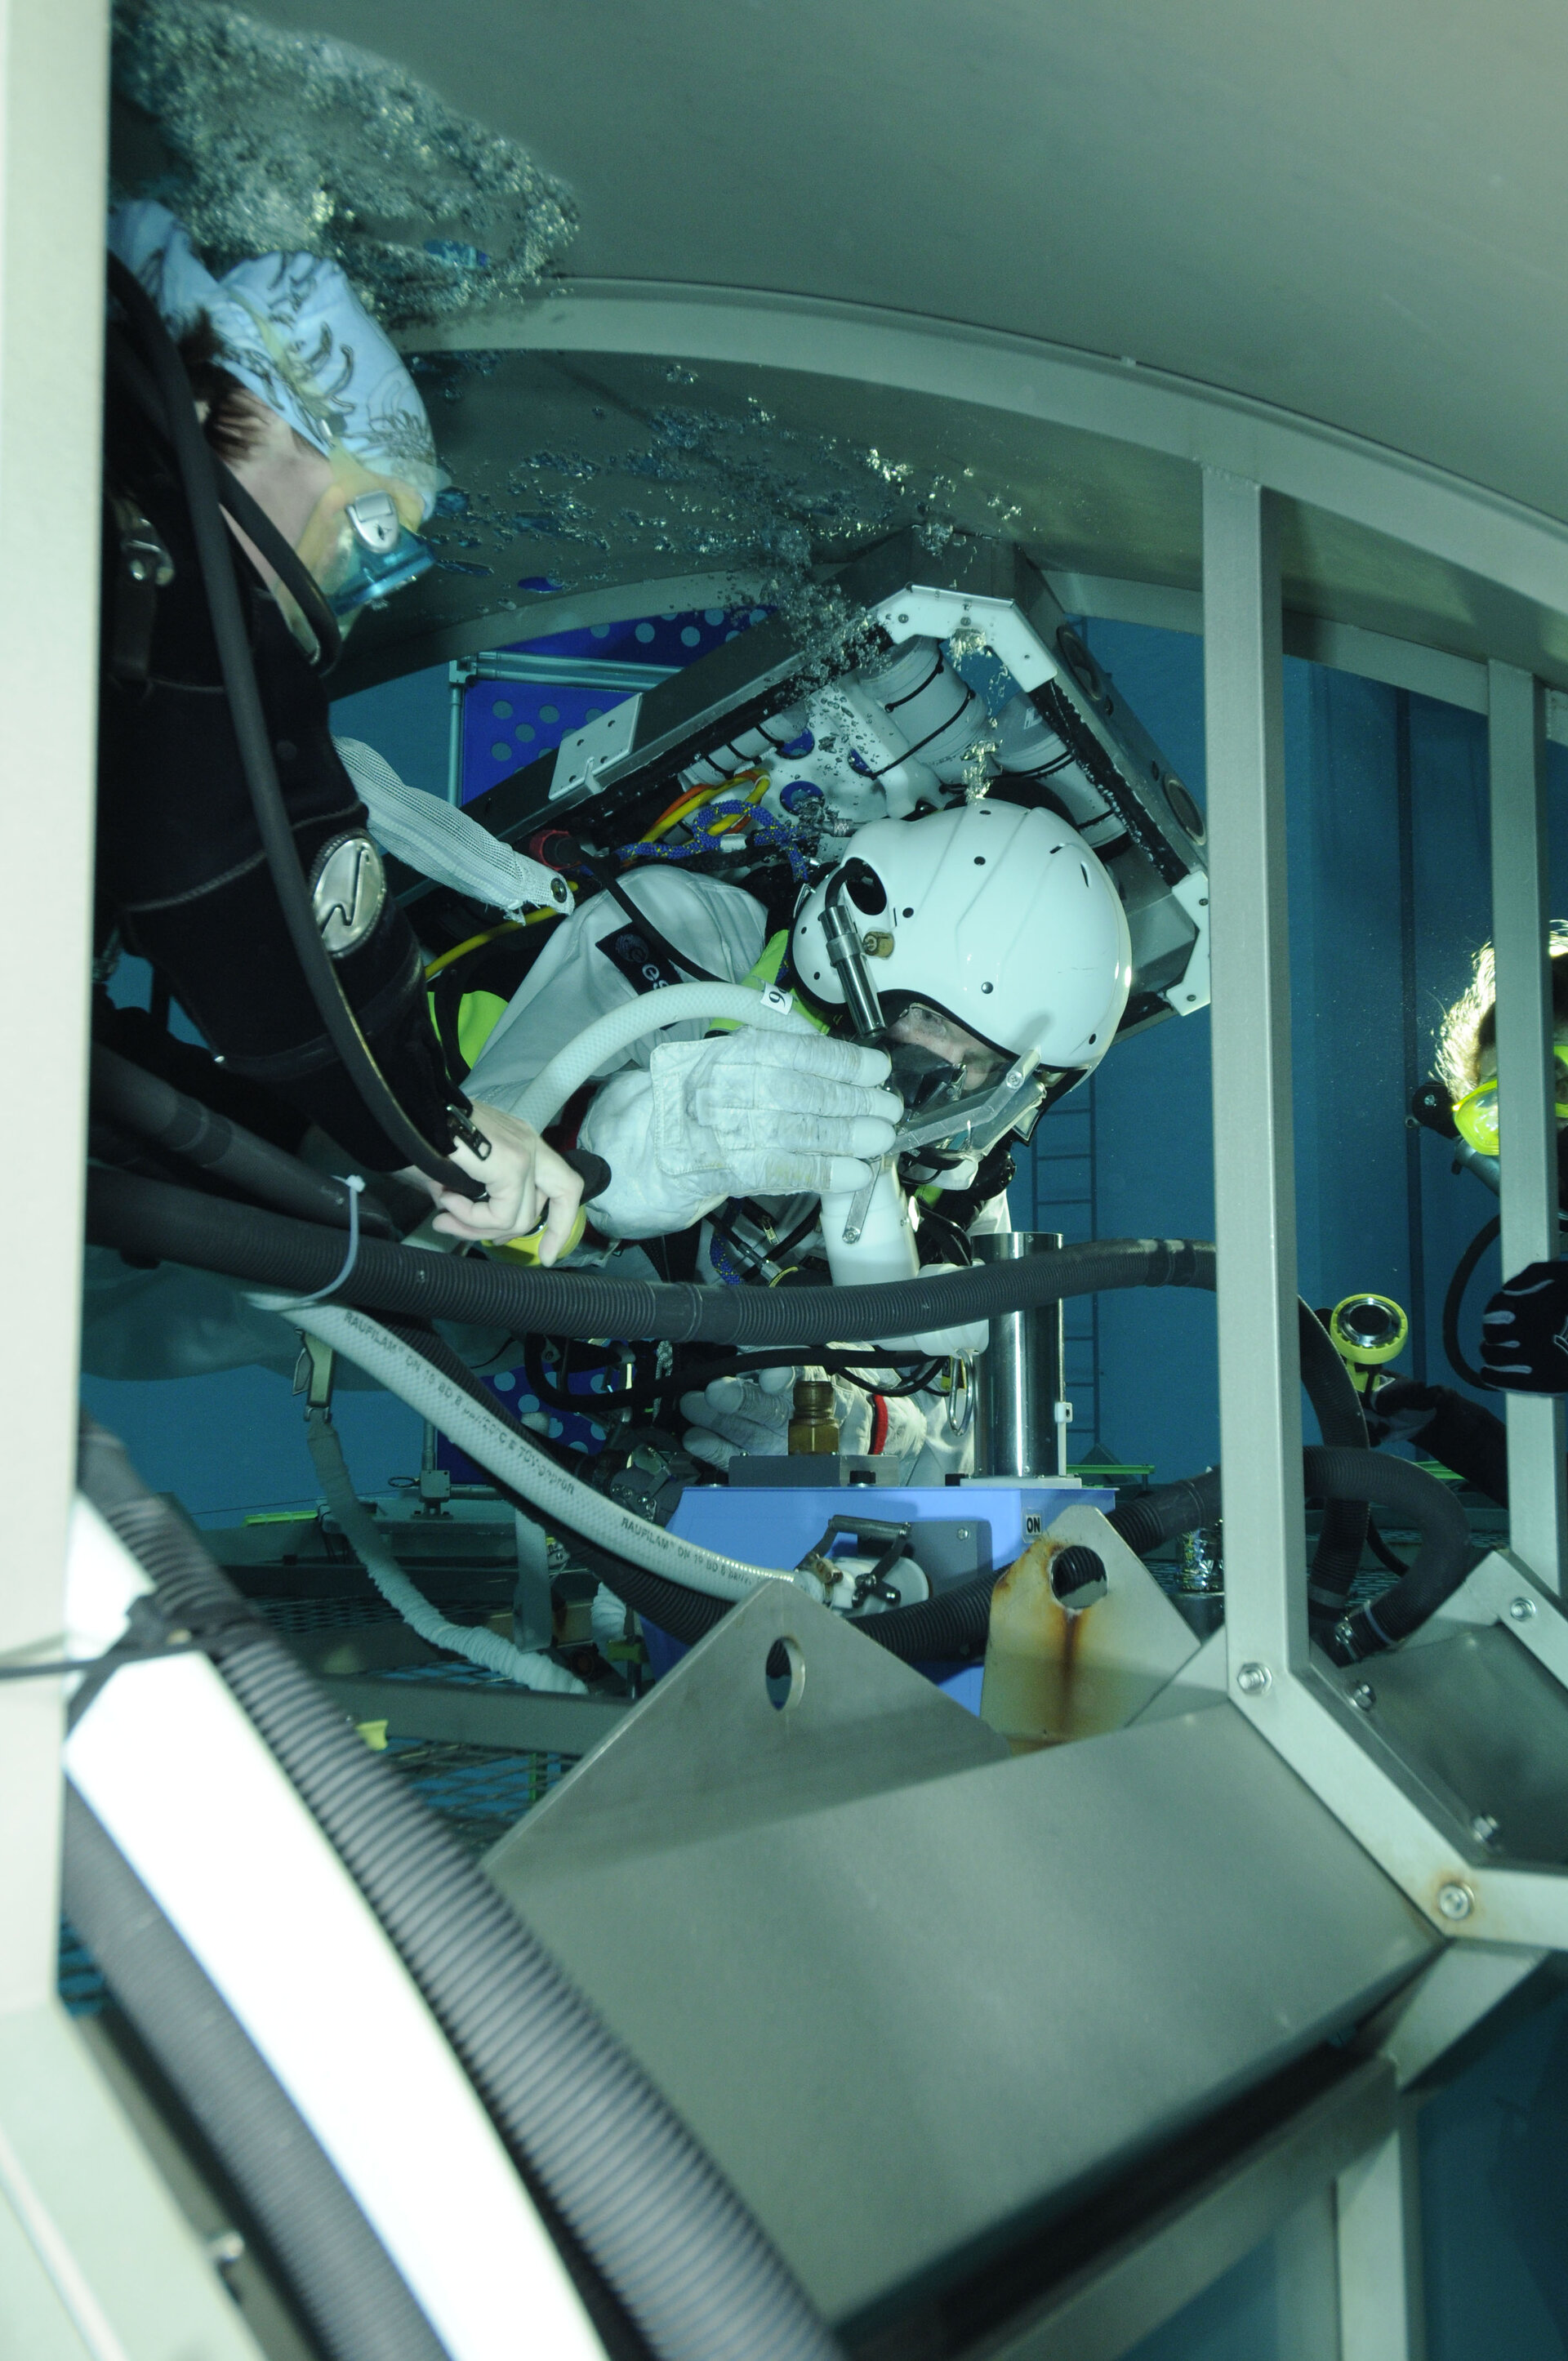 Timothy Peake during training  in the Neutral Buoyancy Facility at EAC